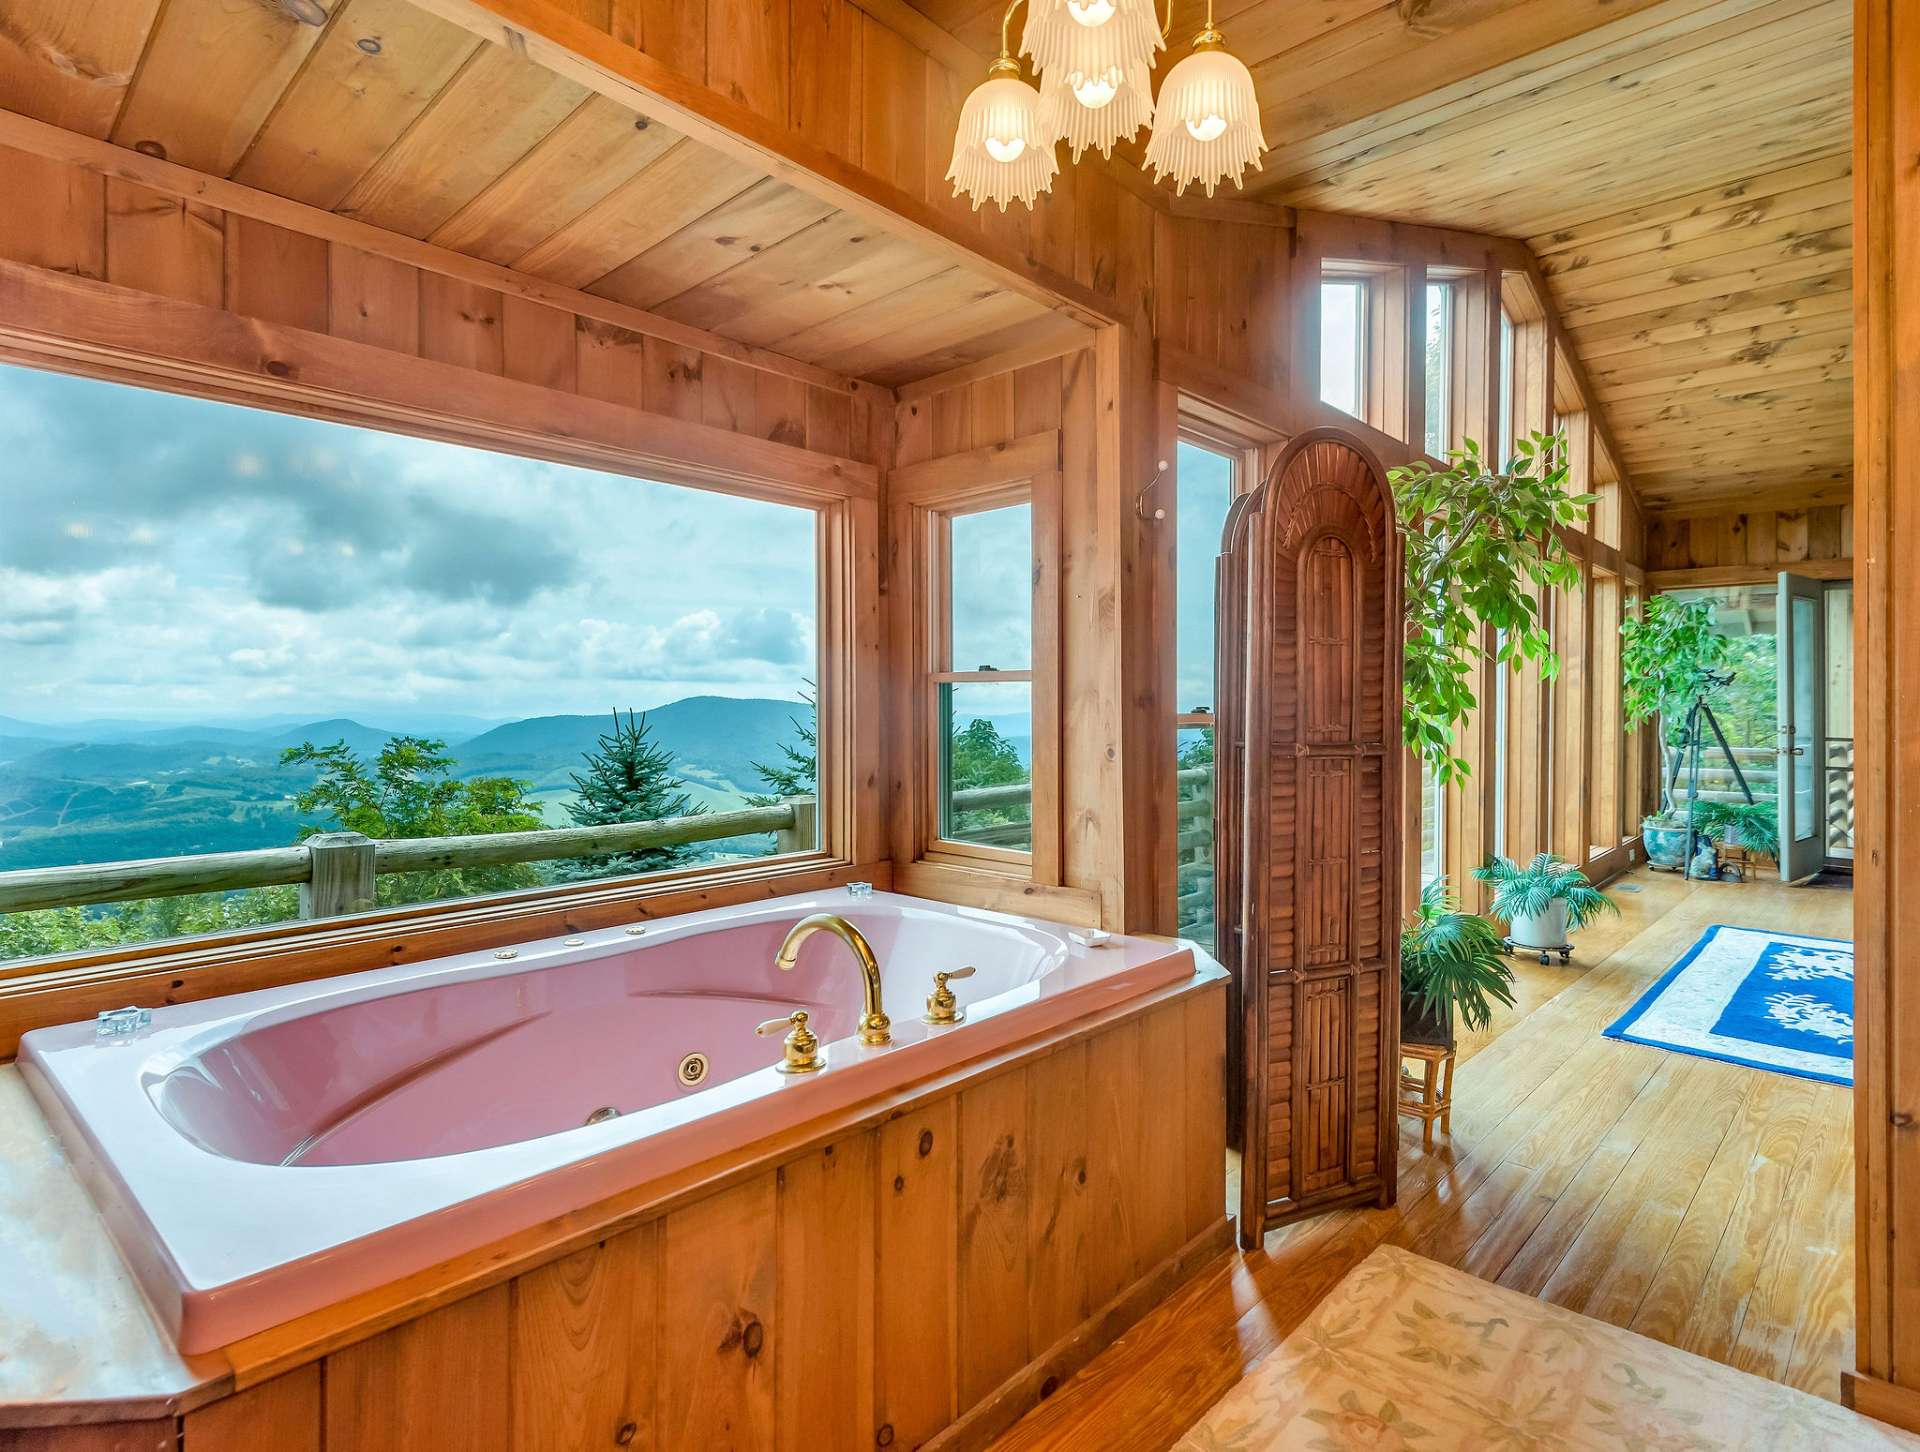 Your cares will float by like the clouds while soaking in this tub.